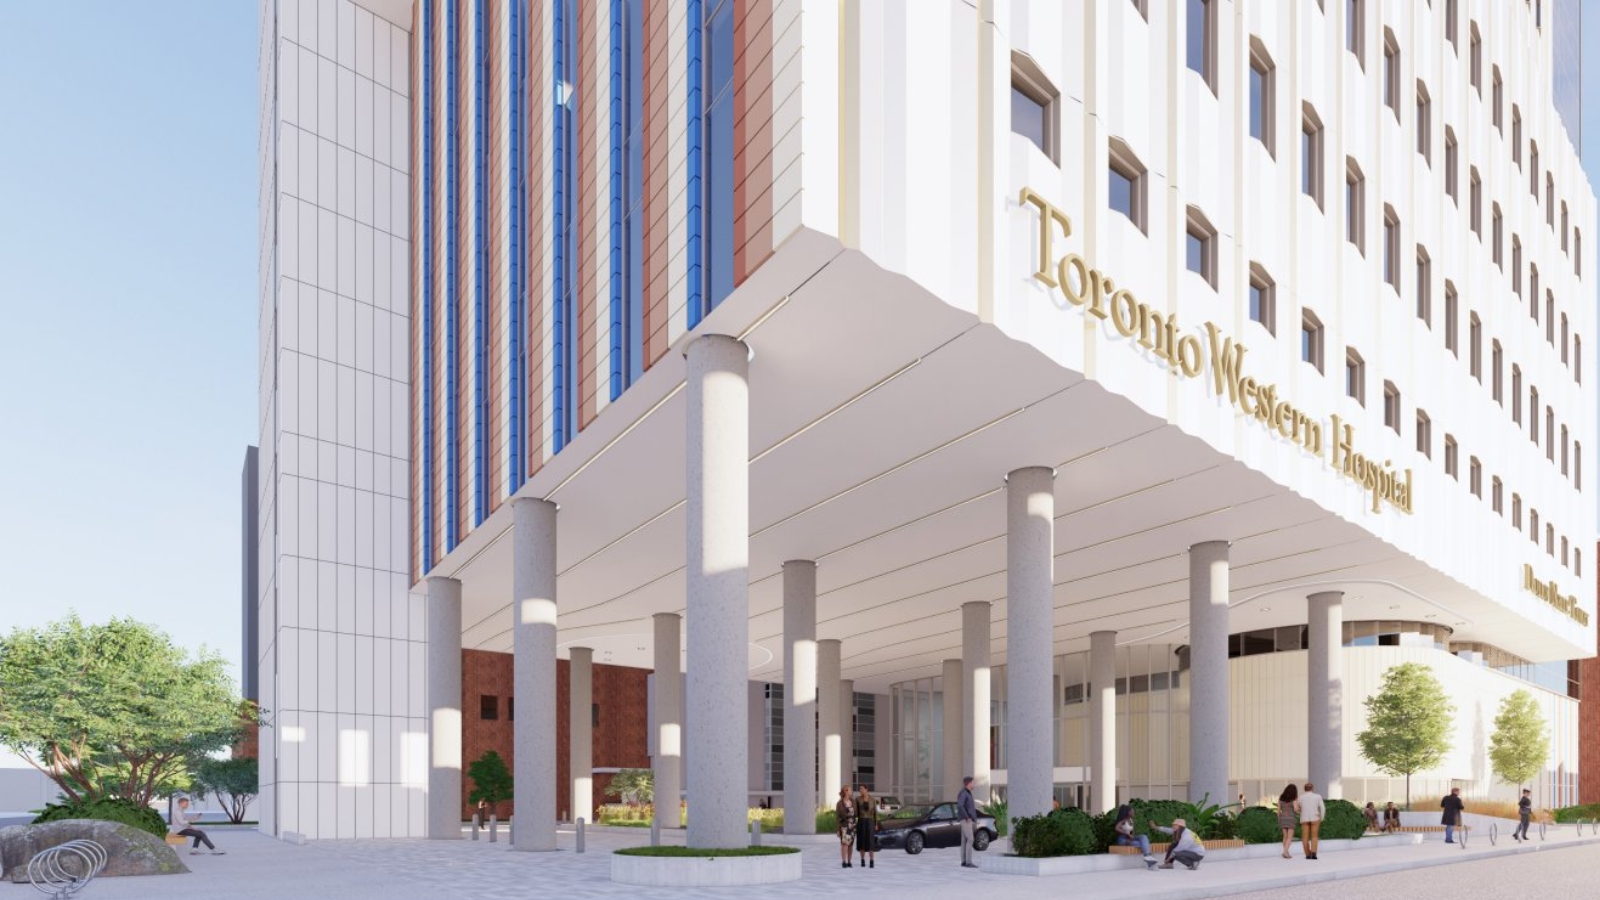 Artist rendering of the northwest view of the drop off area at the new patient tower at Toronto Western Hospital. (Image: Courtesy DIALOG Design)